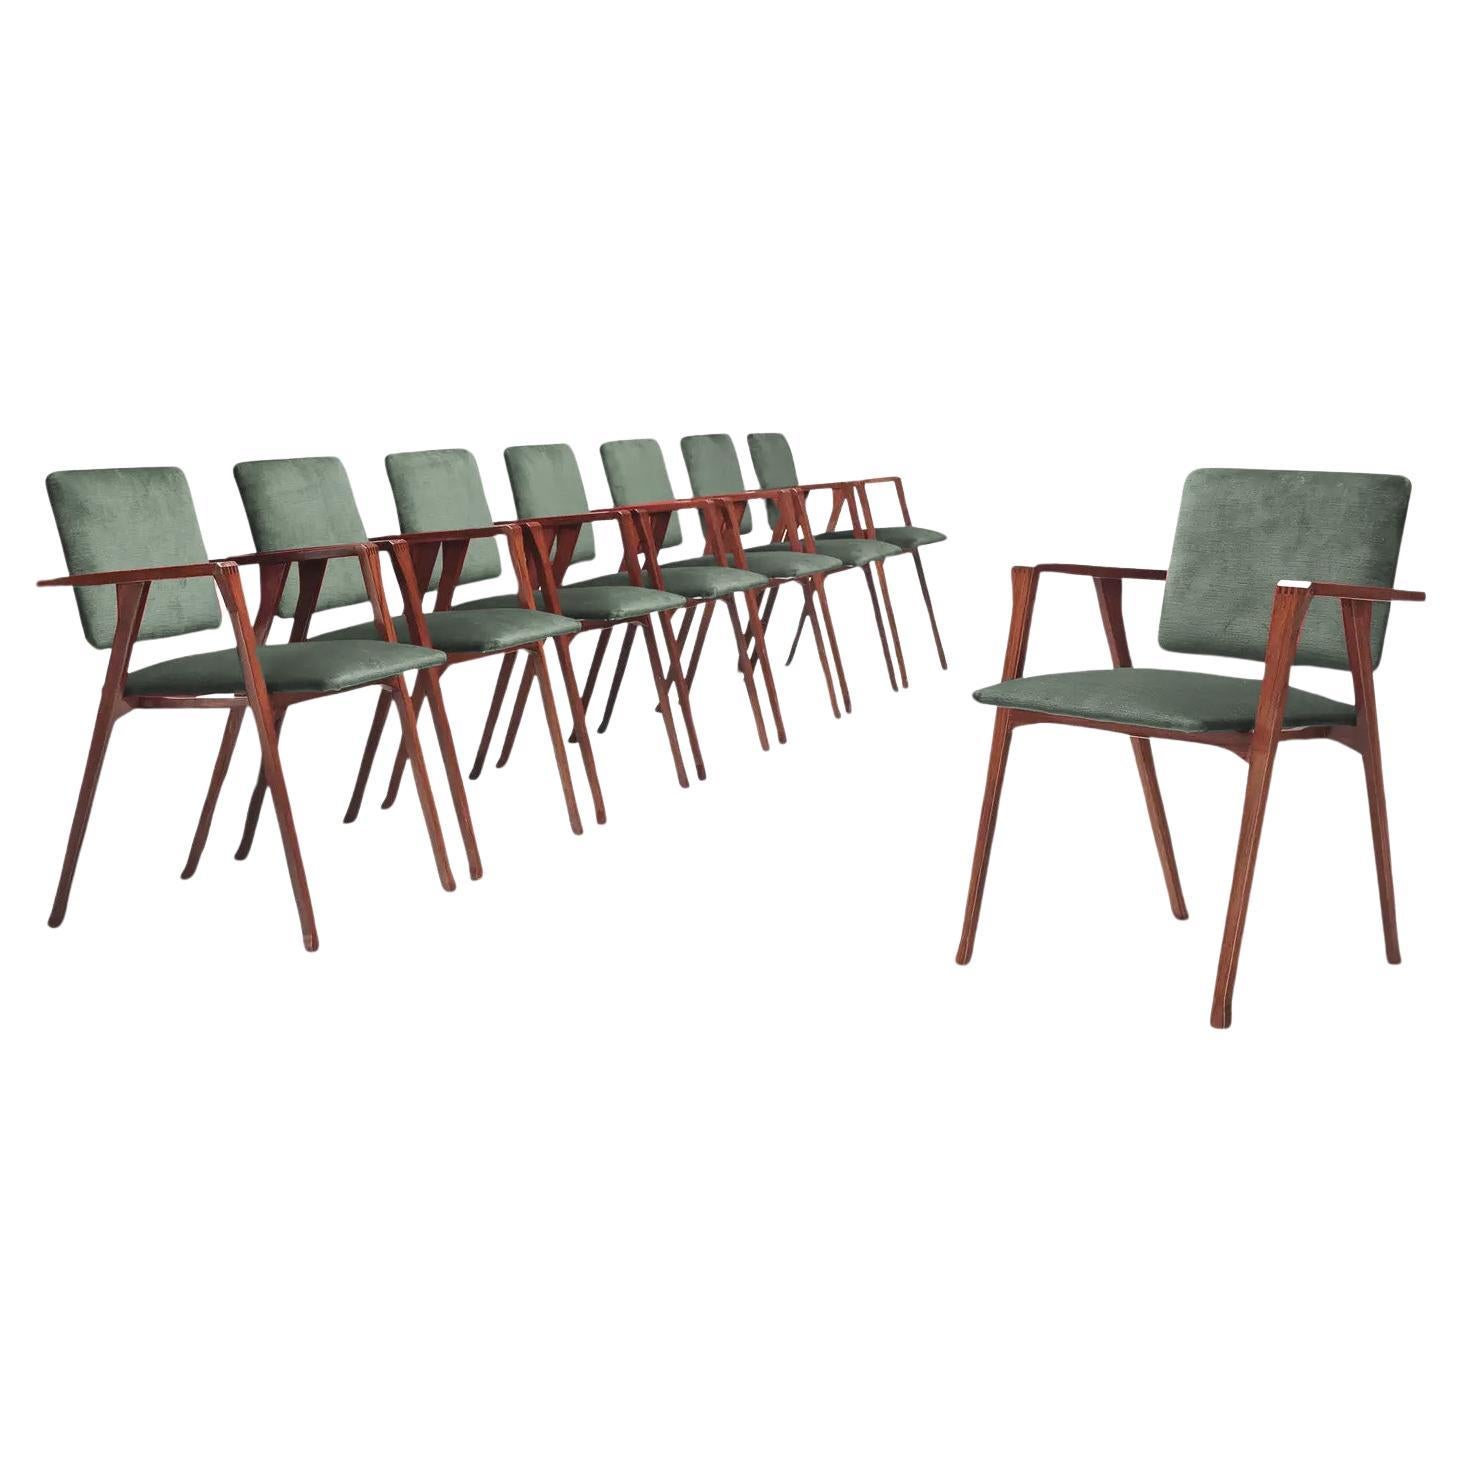 Franco Albini Set of Eight ''Luisa'' Dining Chairs in Pierre Frey Fabric